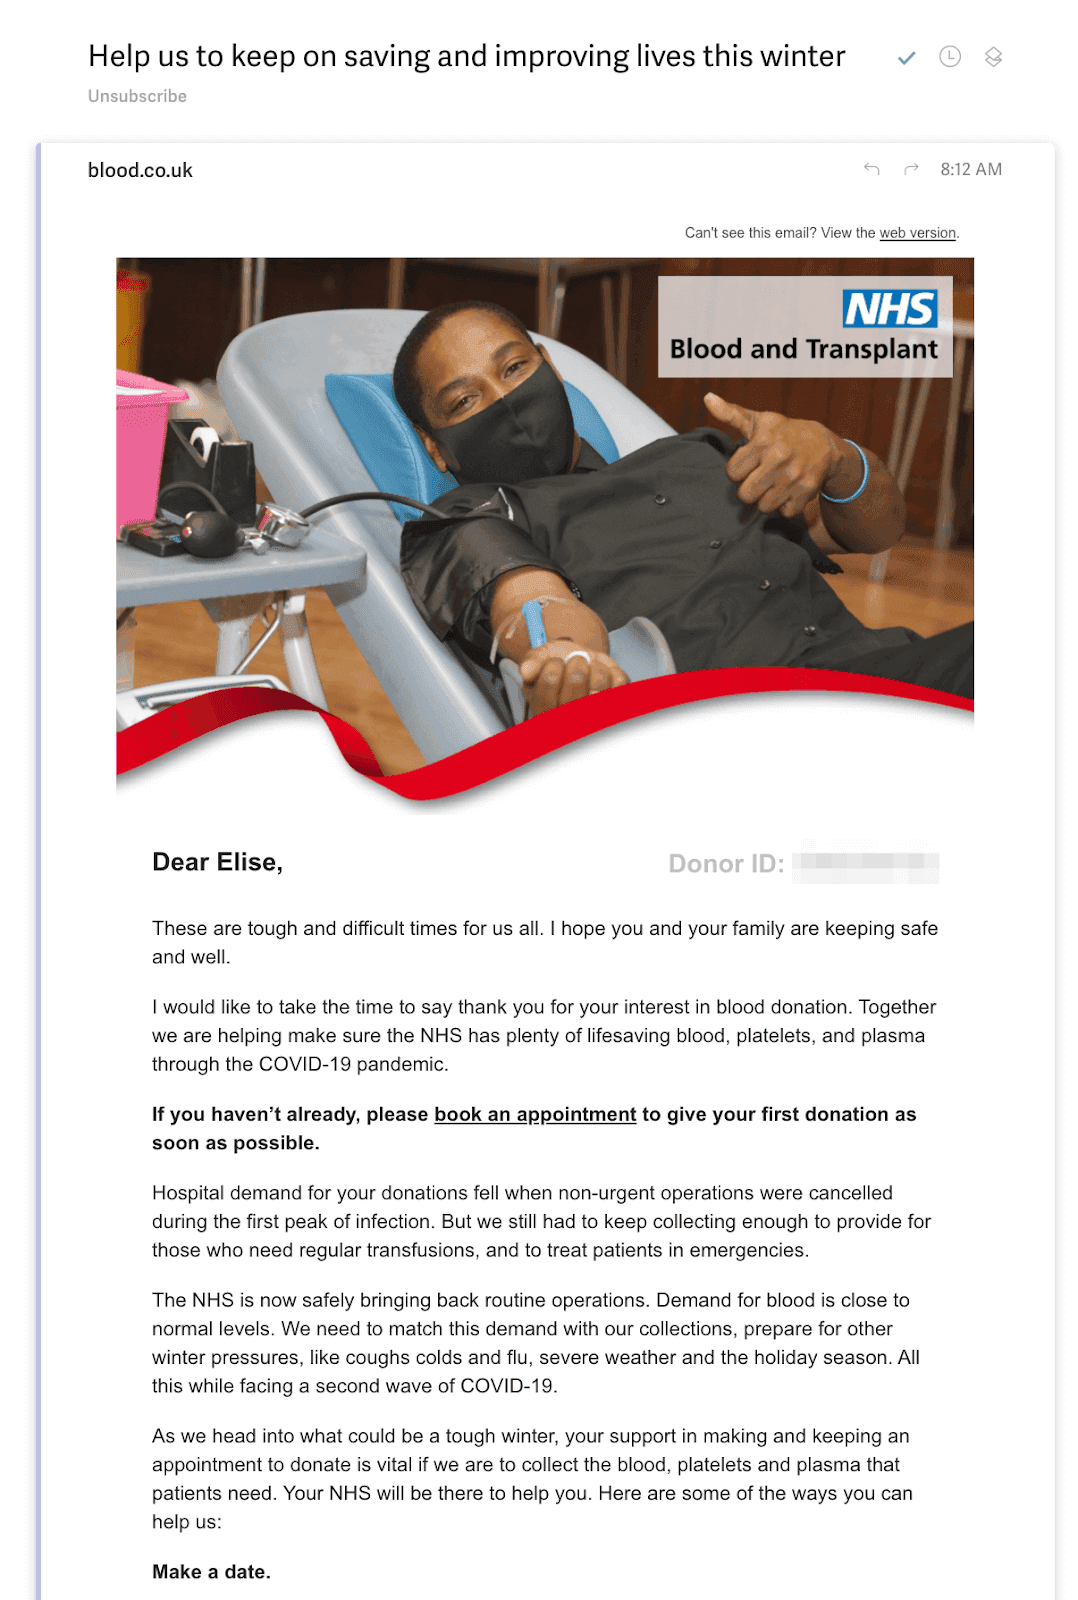 Example of an email drip campaign from blood.co.uk